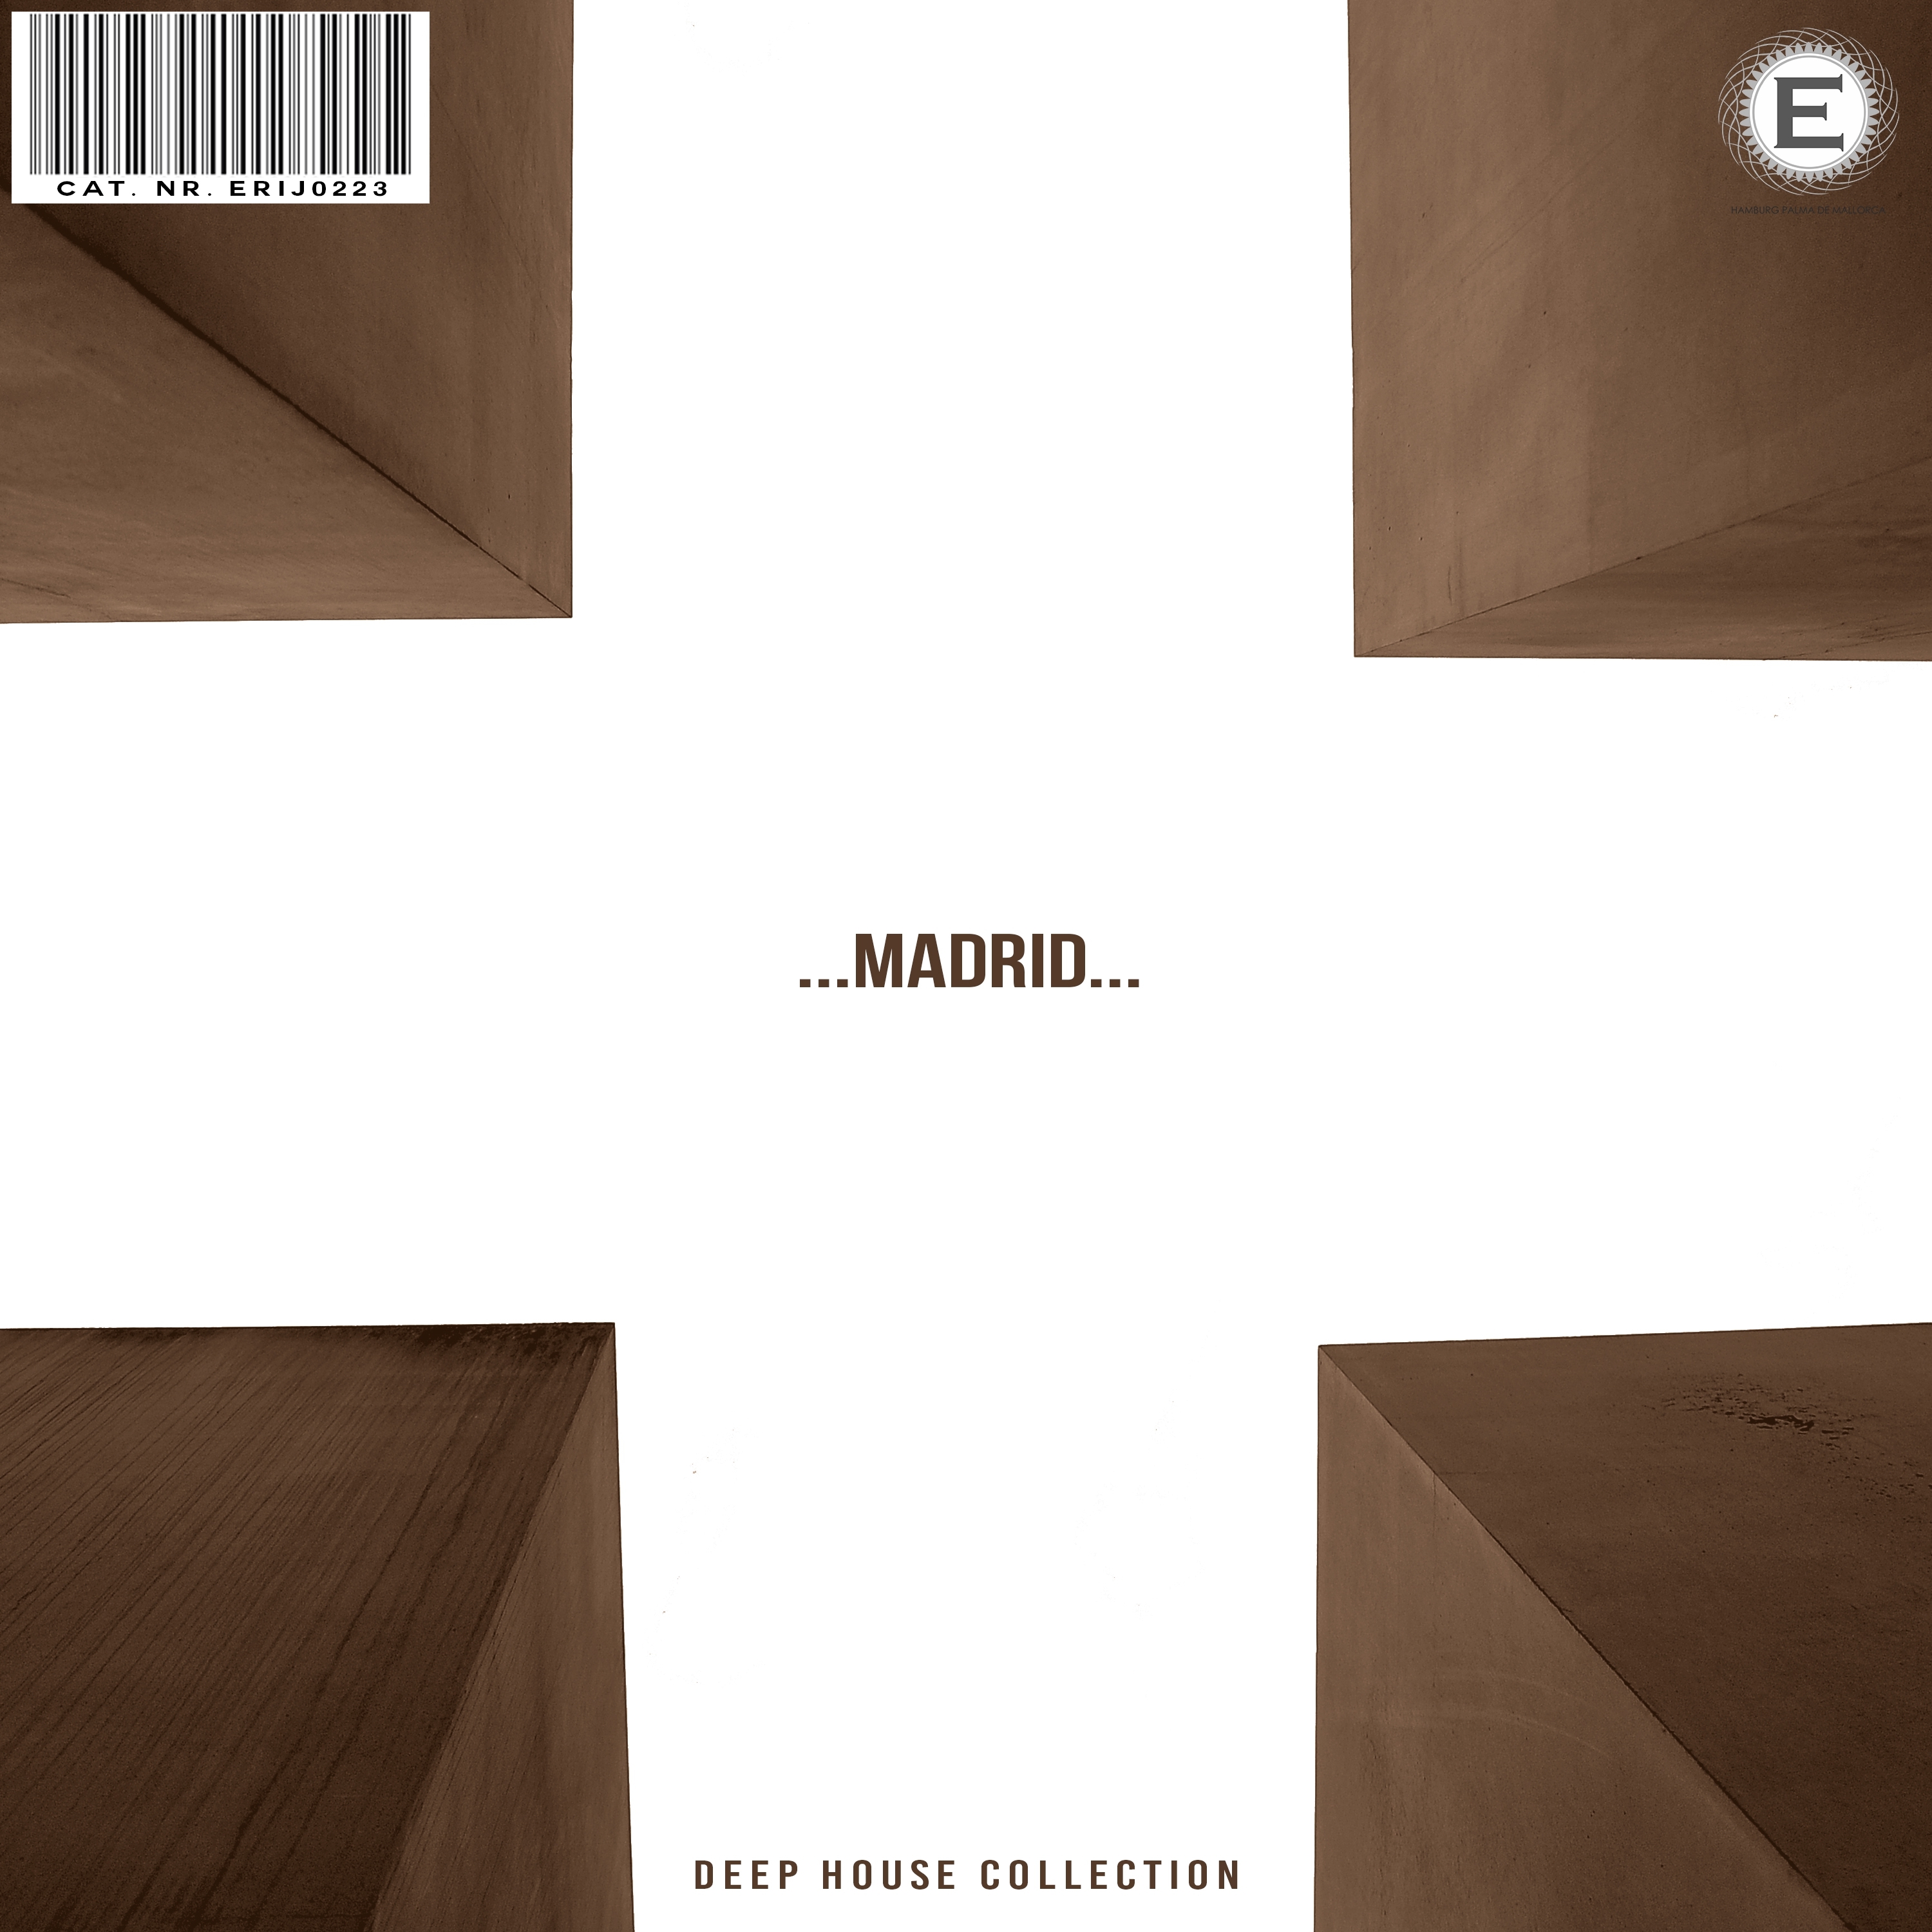 Deep House Collection Madrid